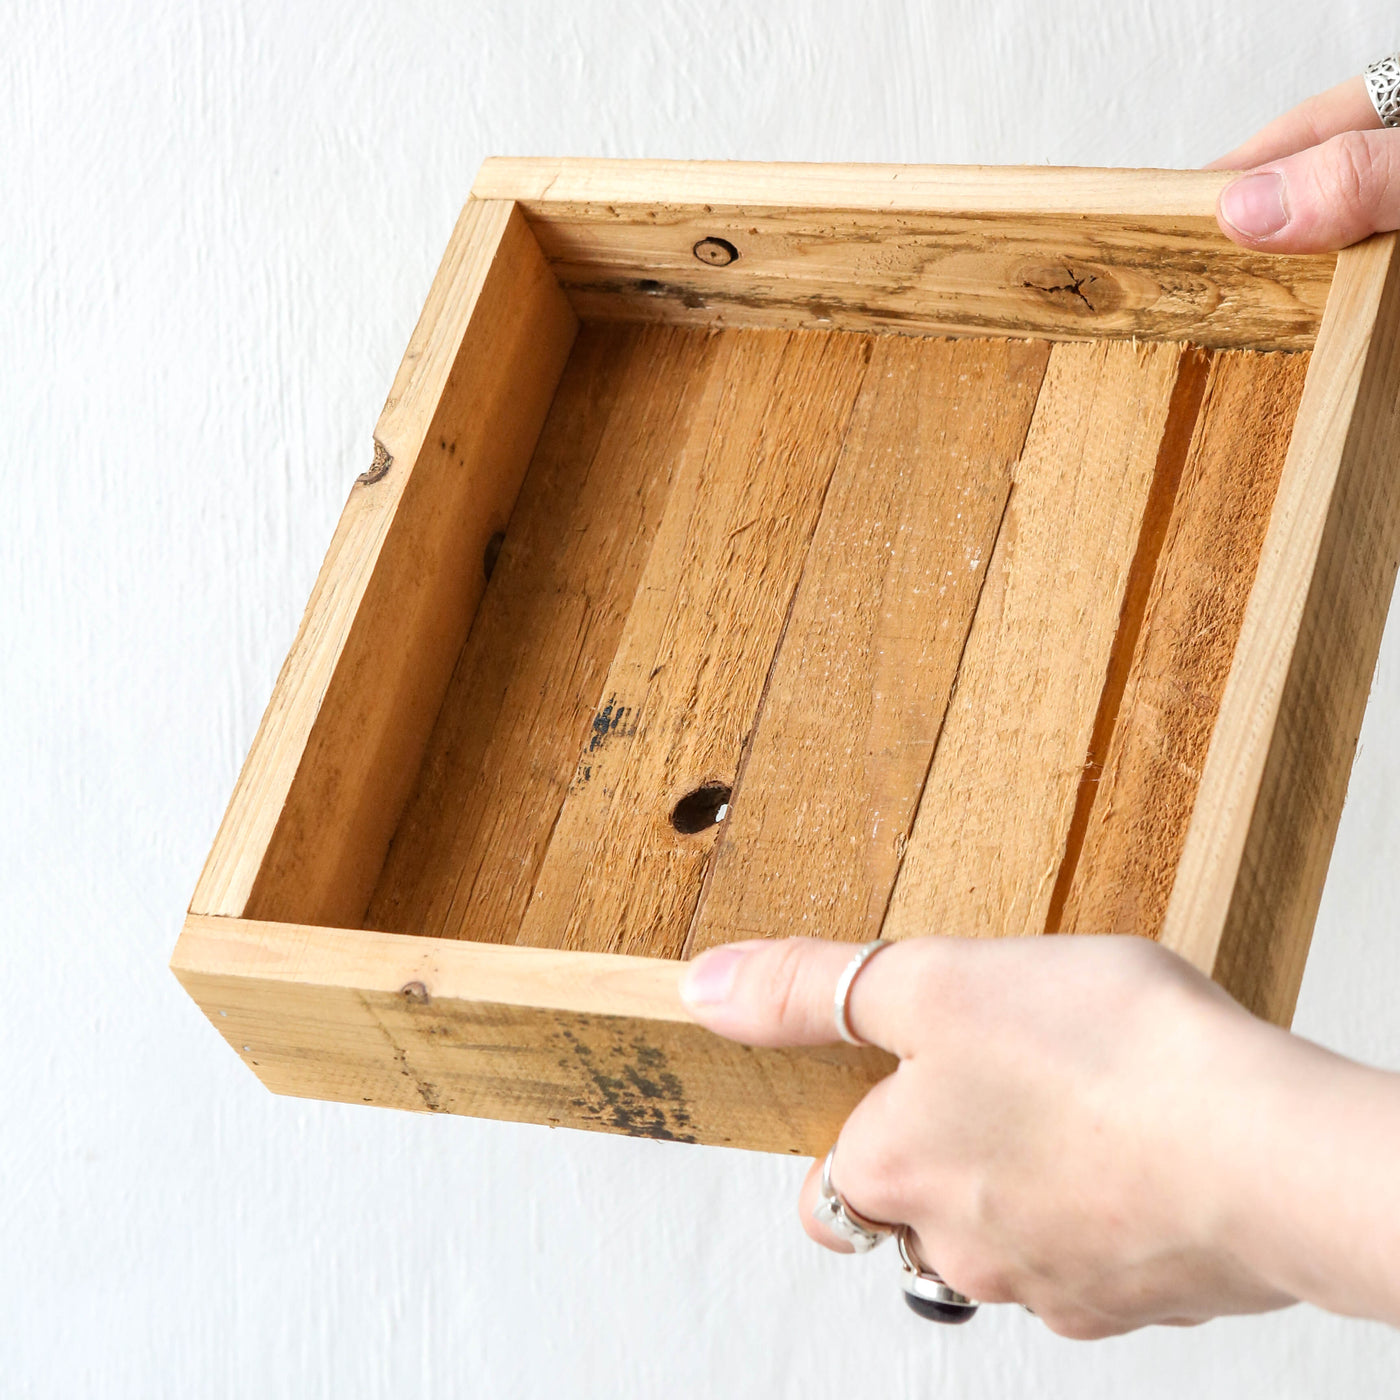 Recycled Wooden Box - Square